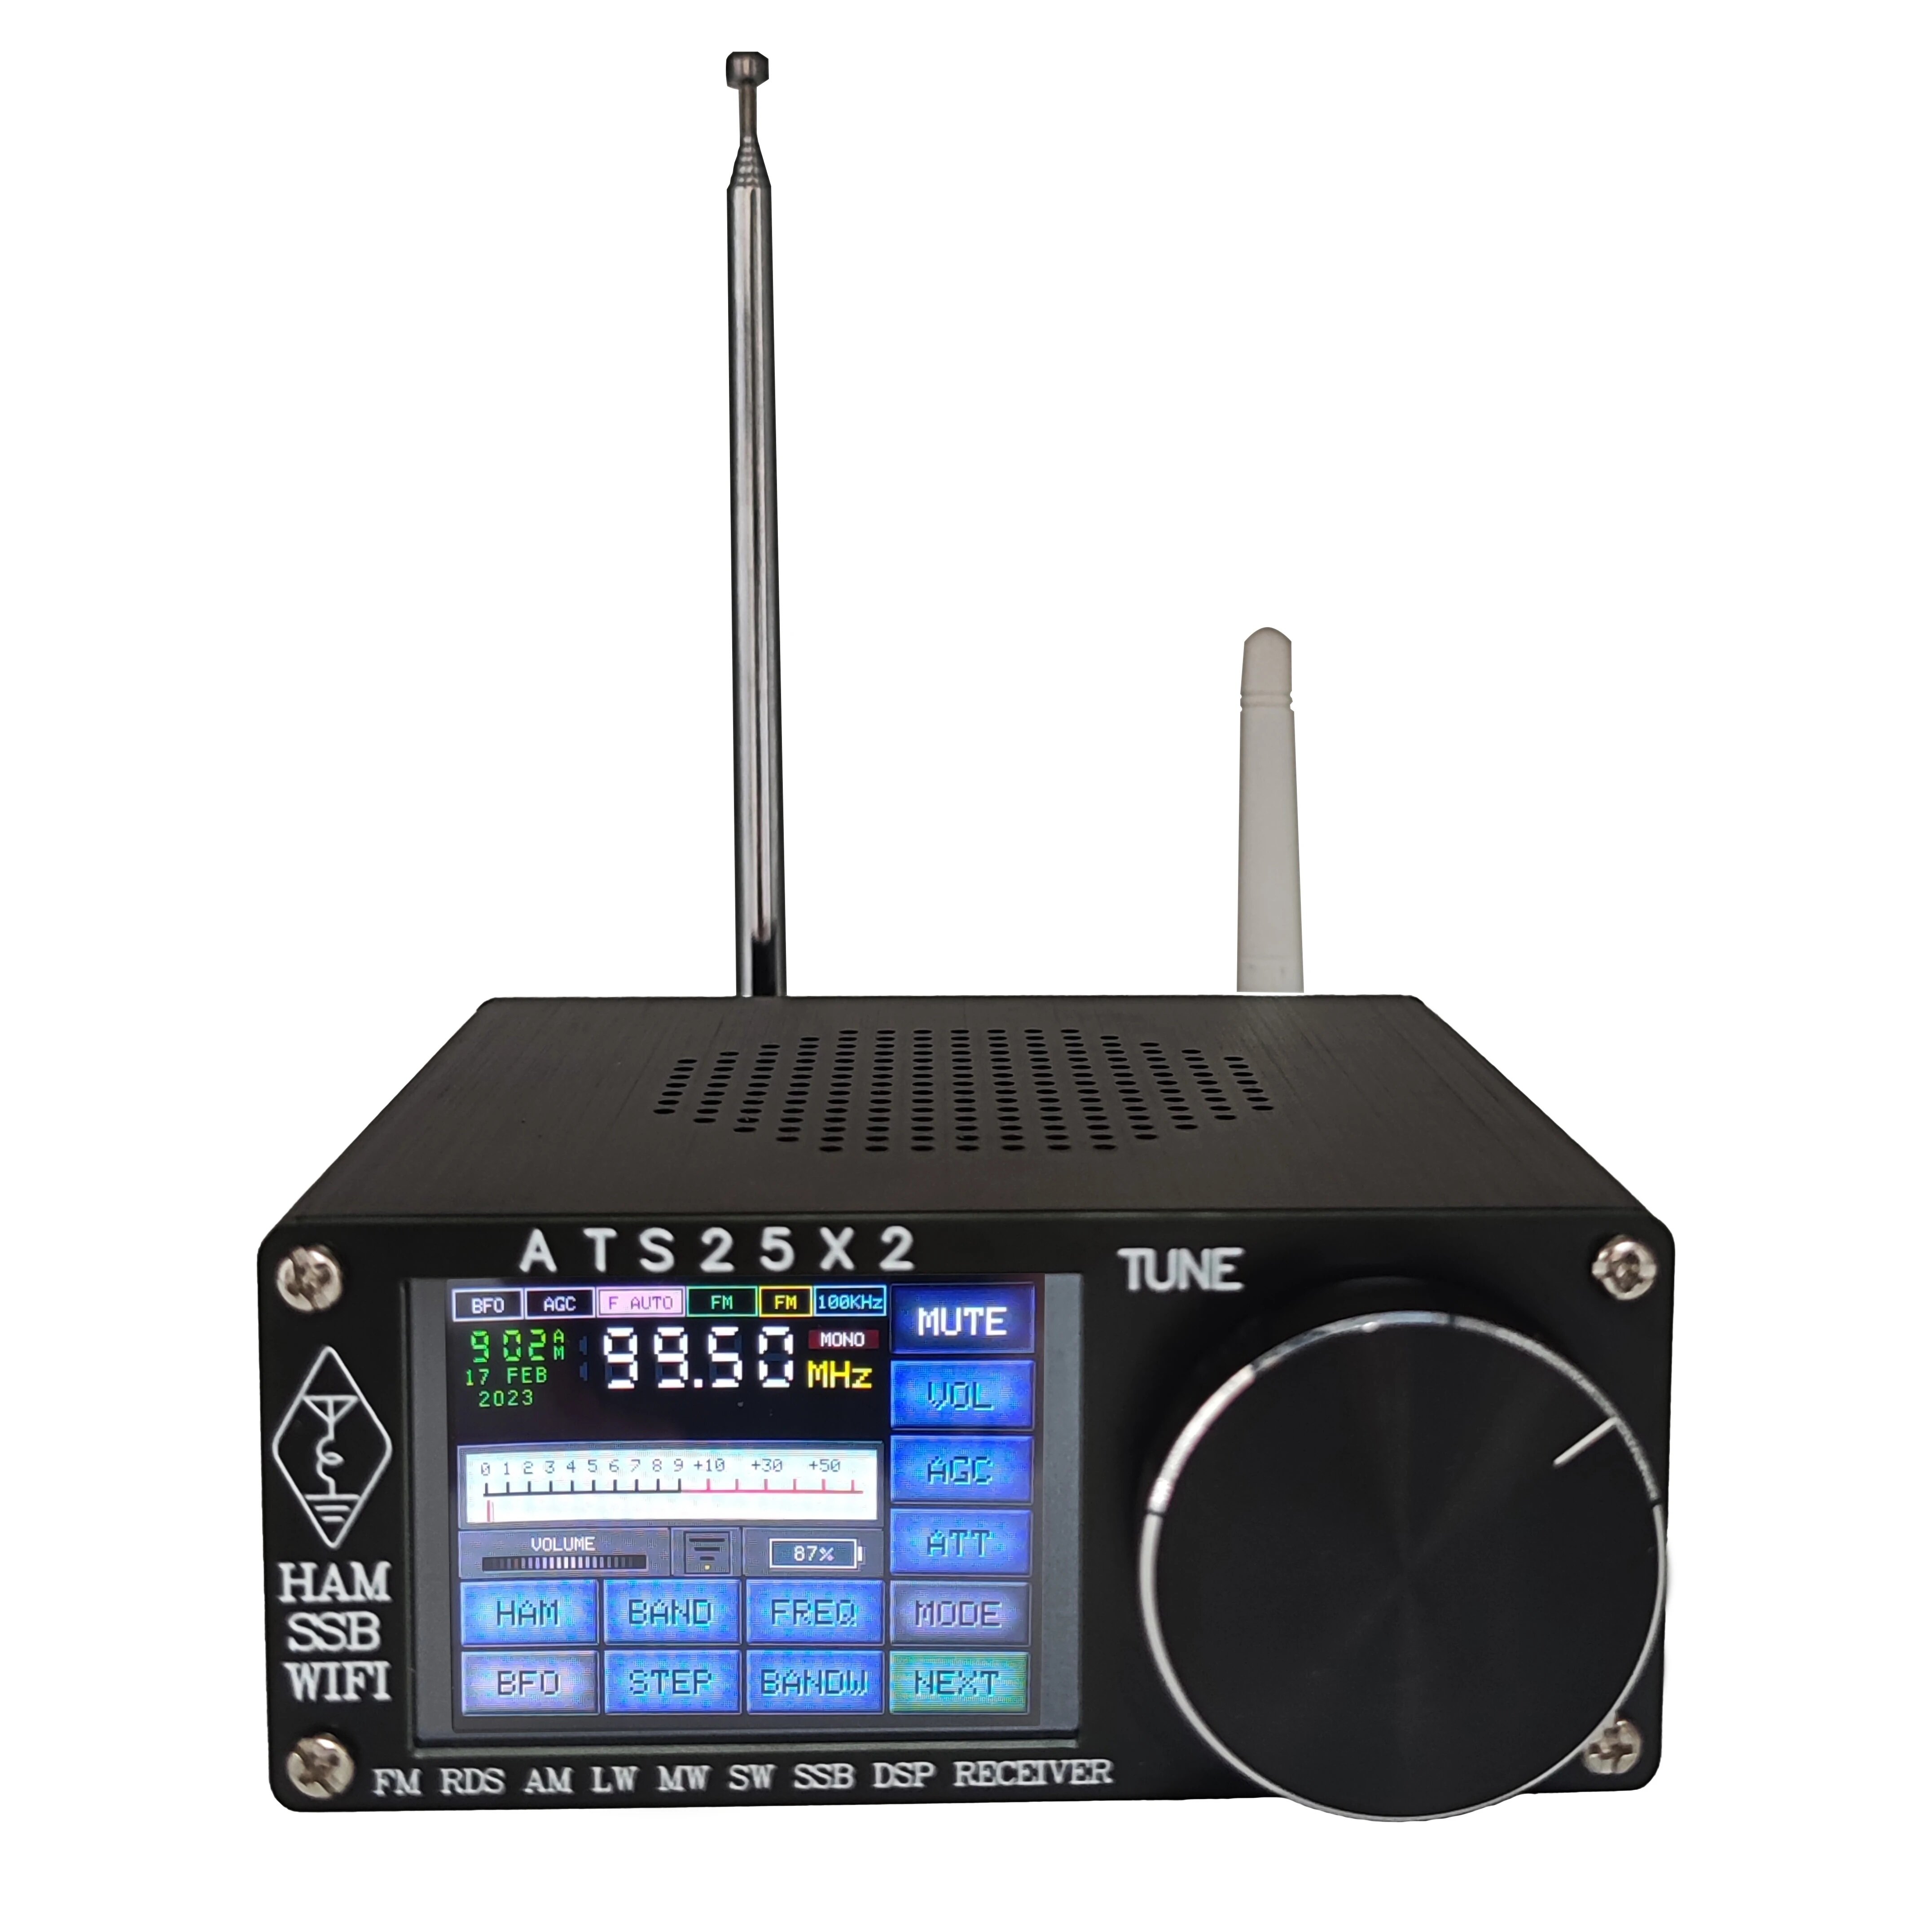 ARINST ATS-25X2 FM APP 4.14 Network WIFI Configuration Full-band Radio With Spectrum Scanning DSP Receiver